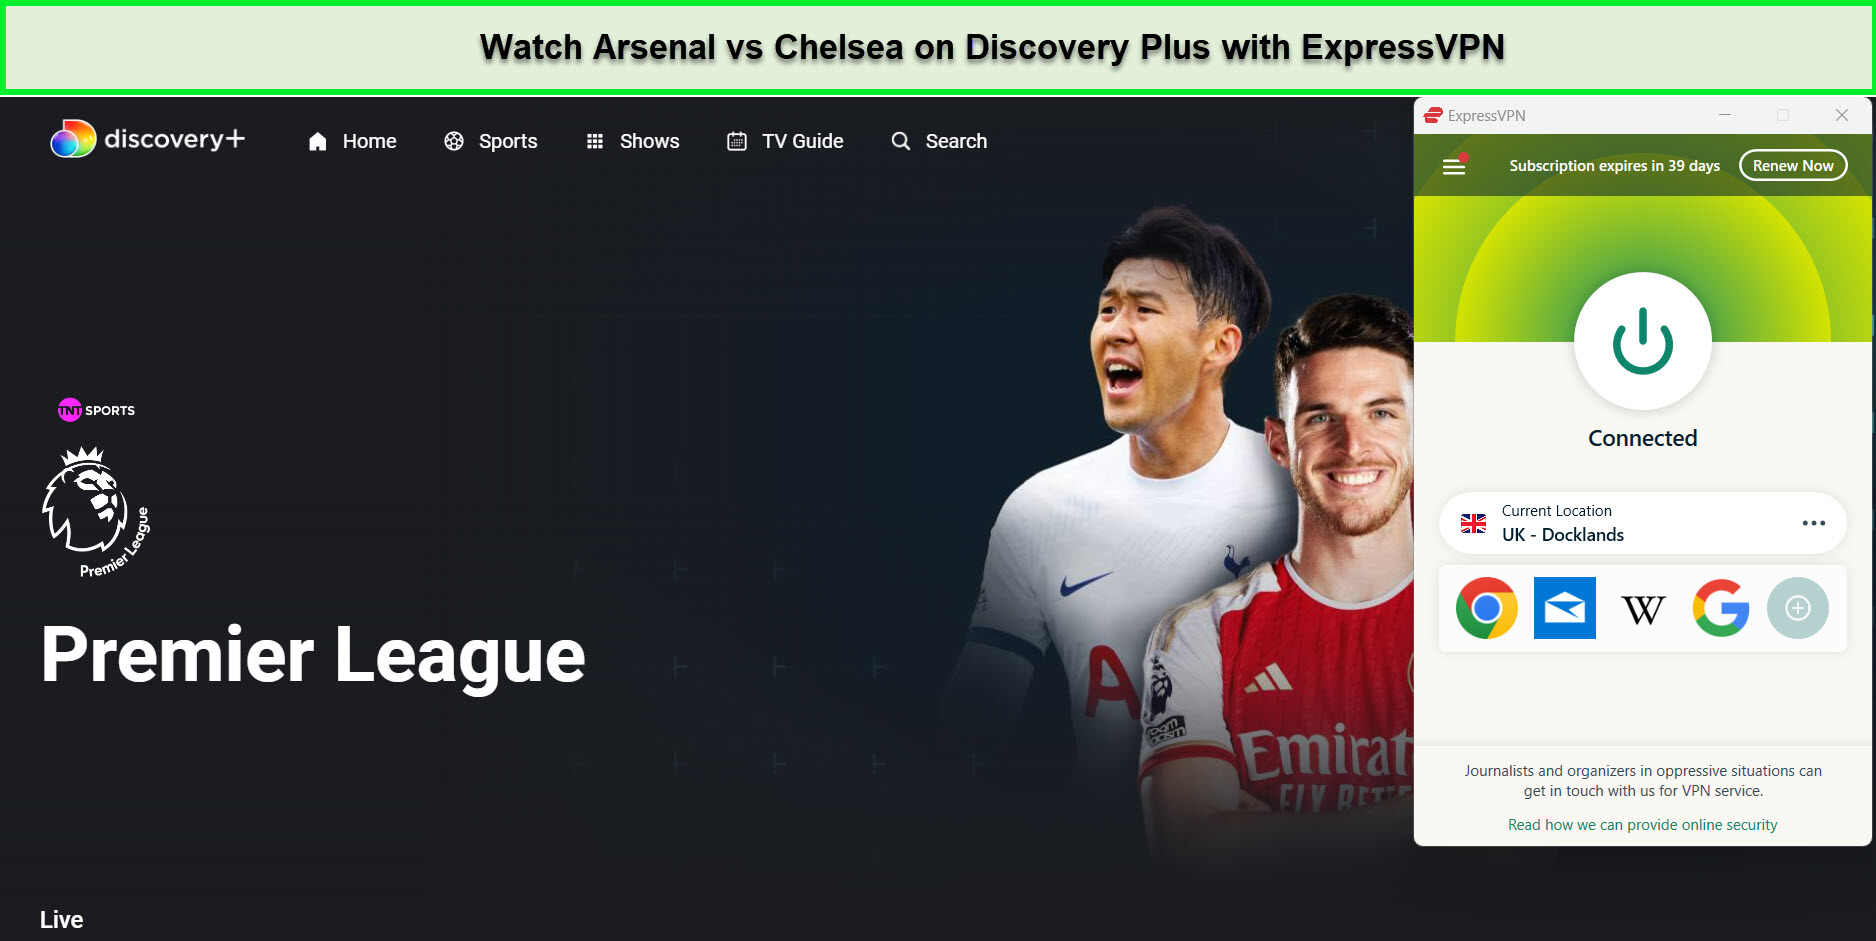 Watch-Arsenal-vs-Chelsea-in-Hong Kong-on-Discovery-Plus-with-ExpressVPN